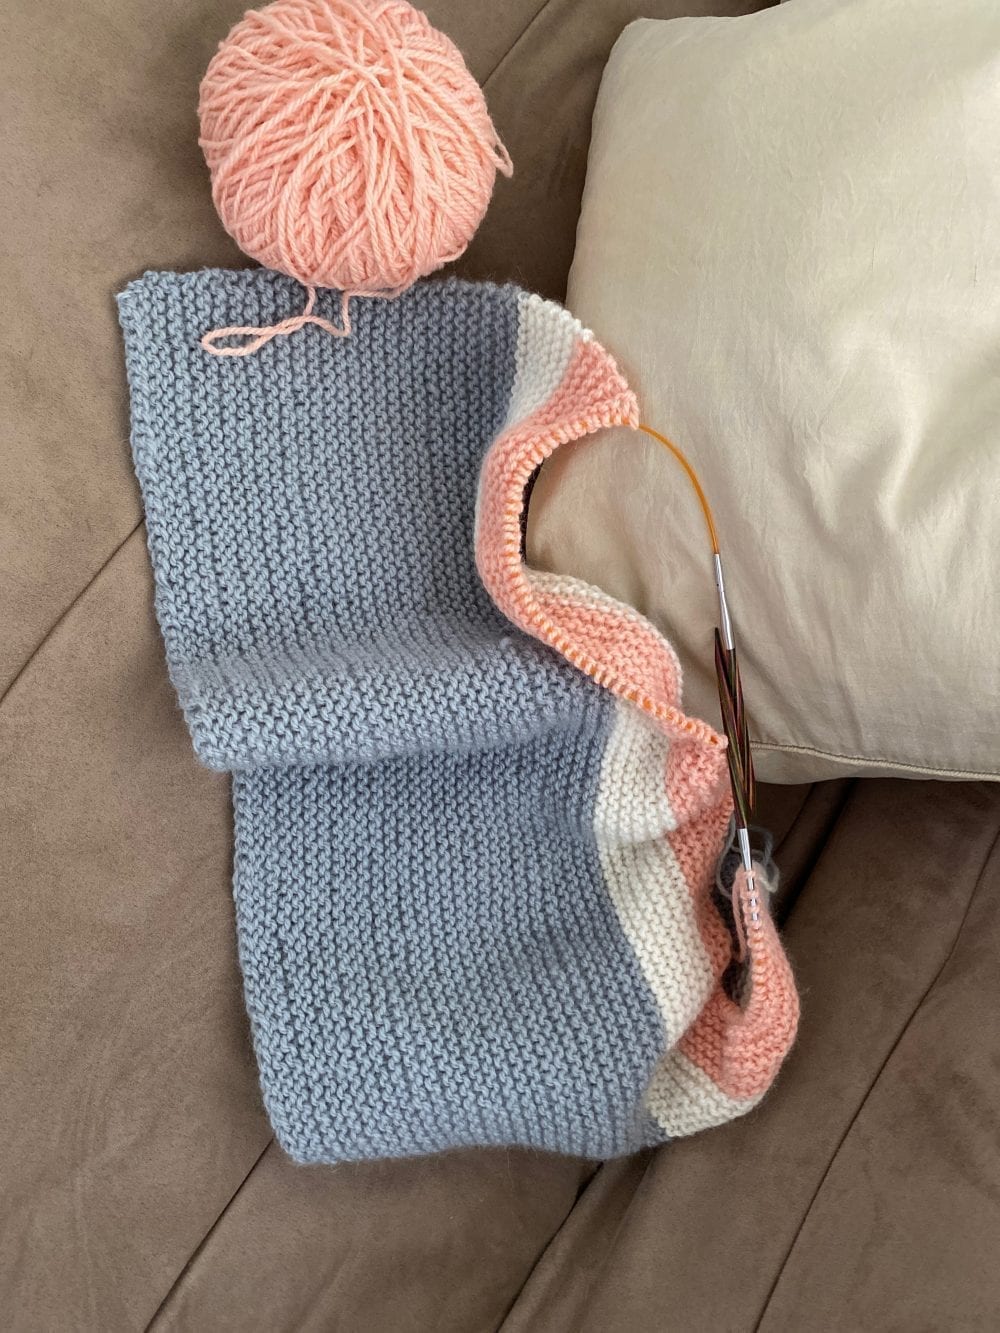 The Woven Co Couch Cuddler Beginner Knit Kit